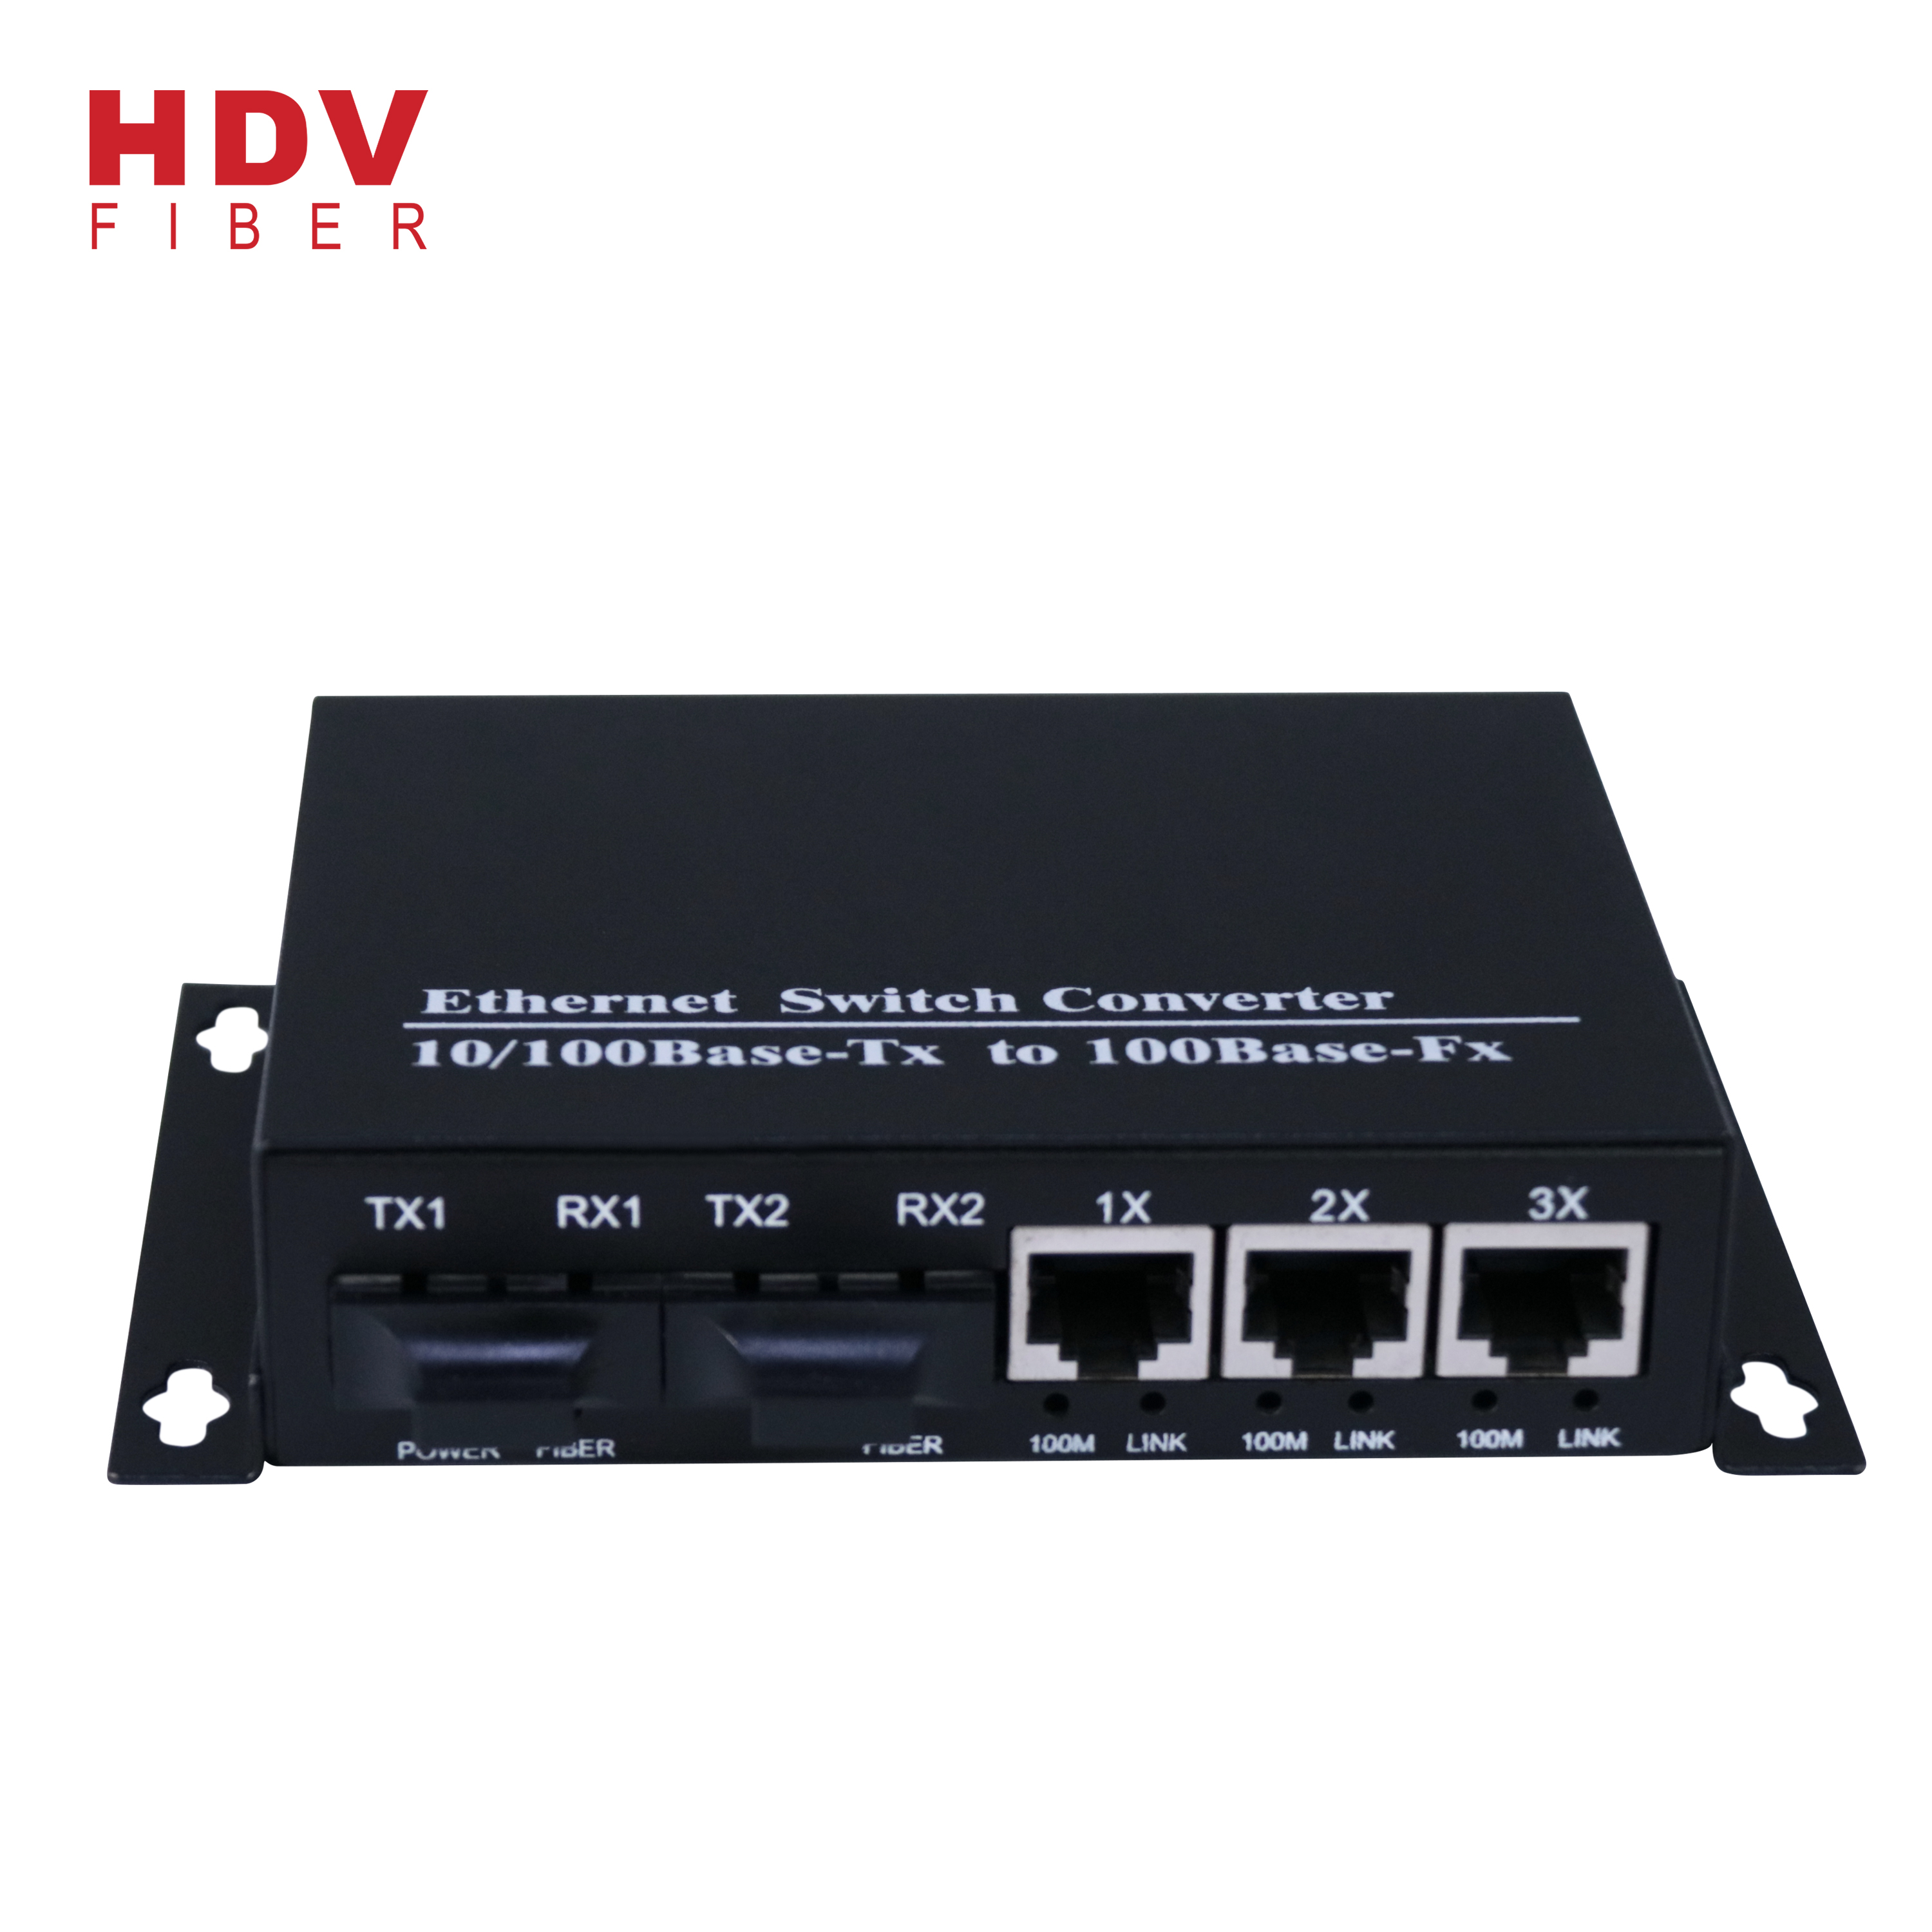 2019 China New Design Transceiver Switch - New Model Dual Fiber Compatible Huawei Industrial 3 Port Ethernet Switch – HDV